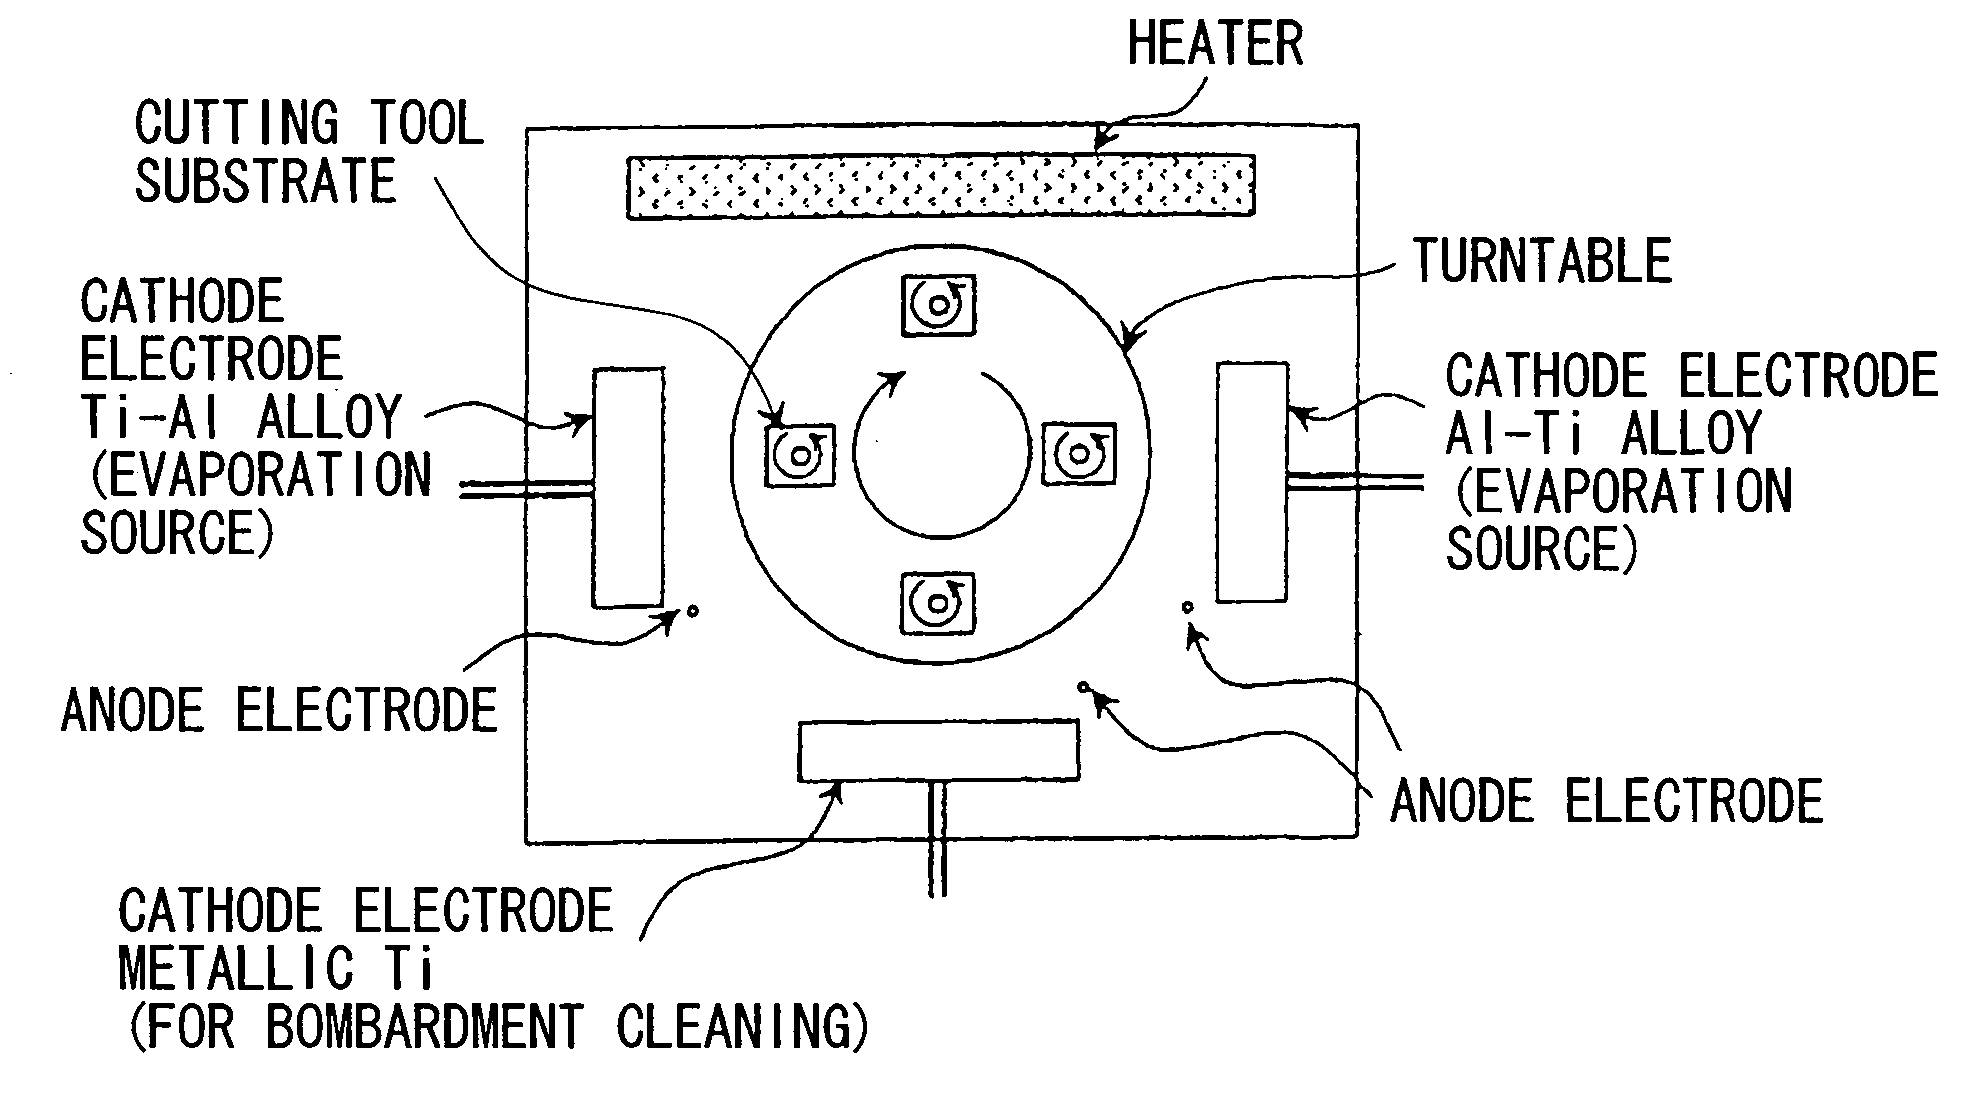 Surface-coated cutting tool member having coating layer exhibiting superior wear resistance during high speed cutting operation and method for forming hard coating layer on surface of cutting tool